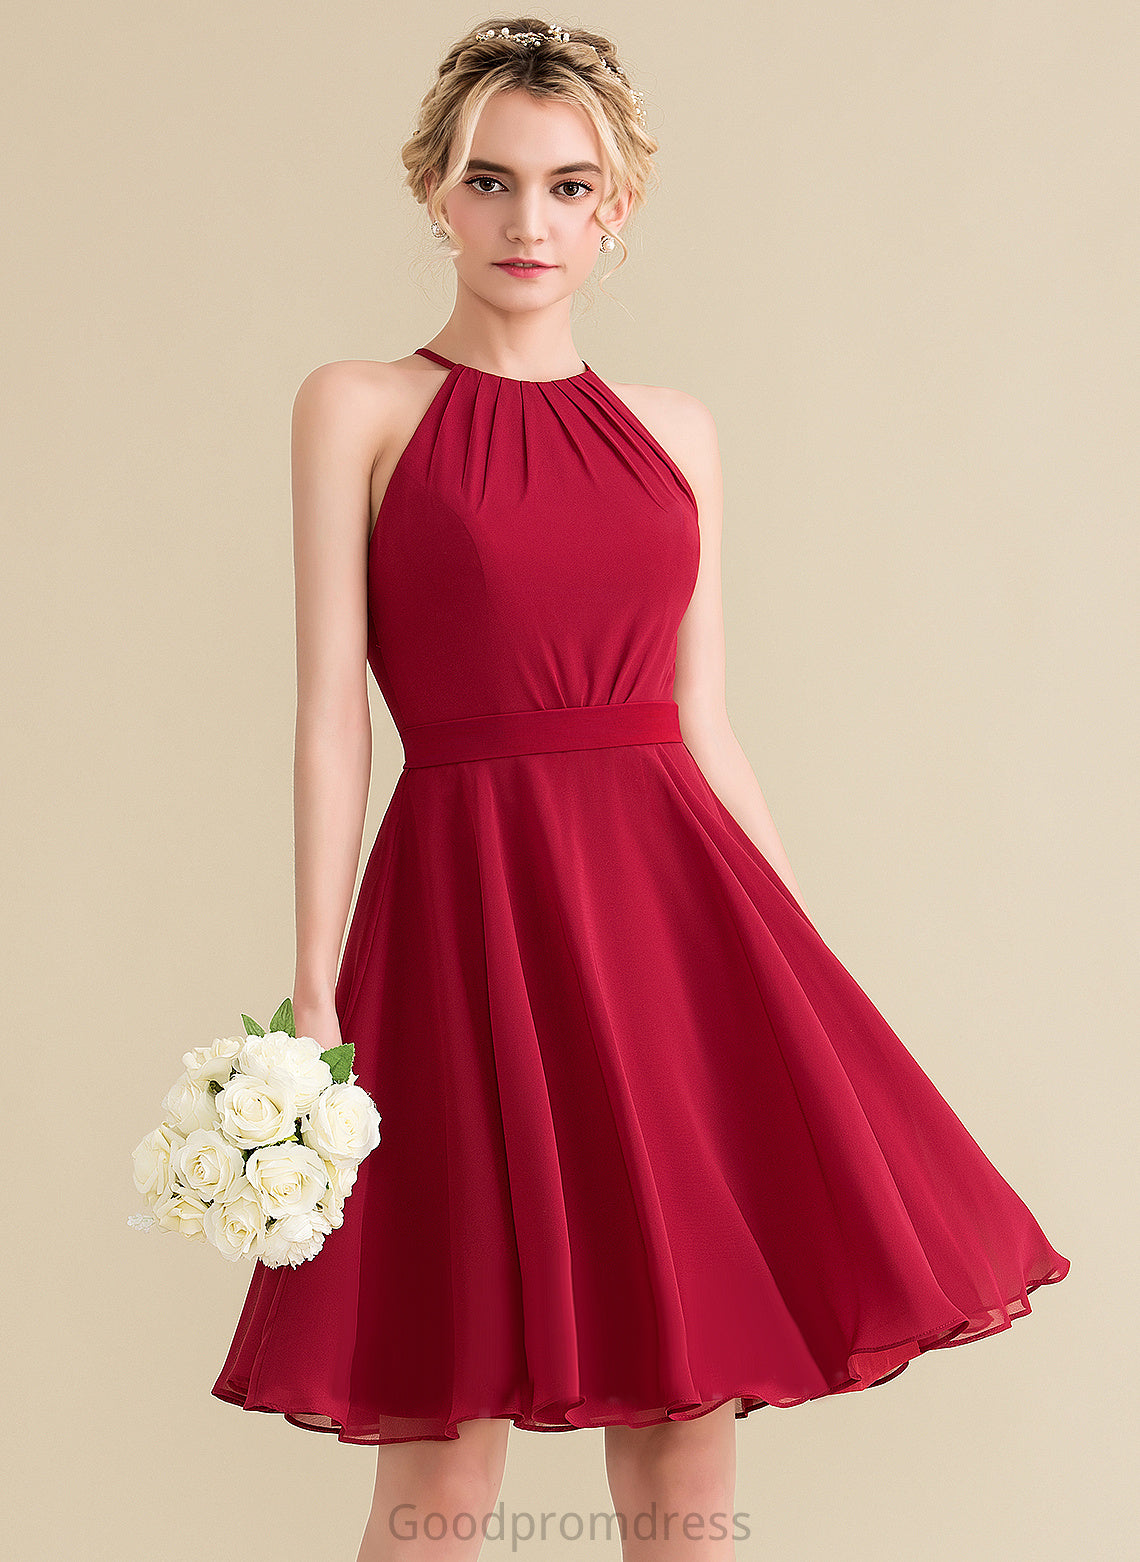 Homecoming Ruffle Bow(s) Kailey Homecoming Dresses Scoop Chiffon With Neck Dress Knee-Length A-Line